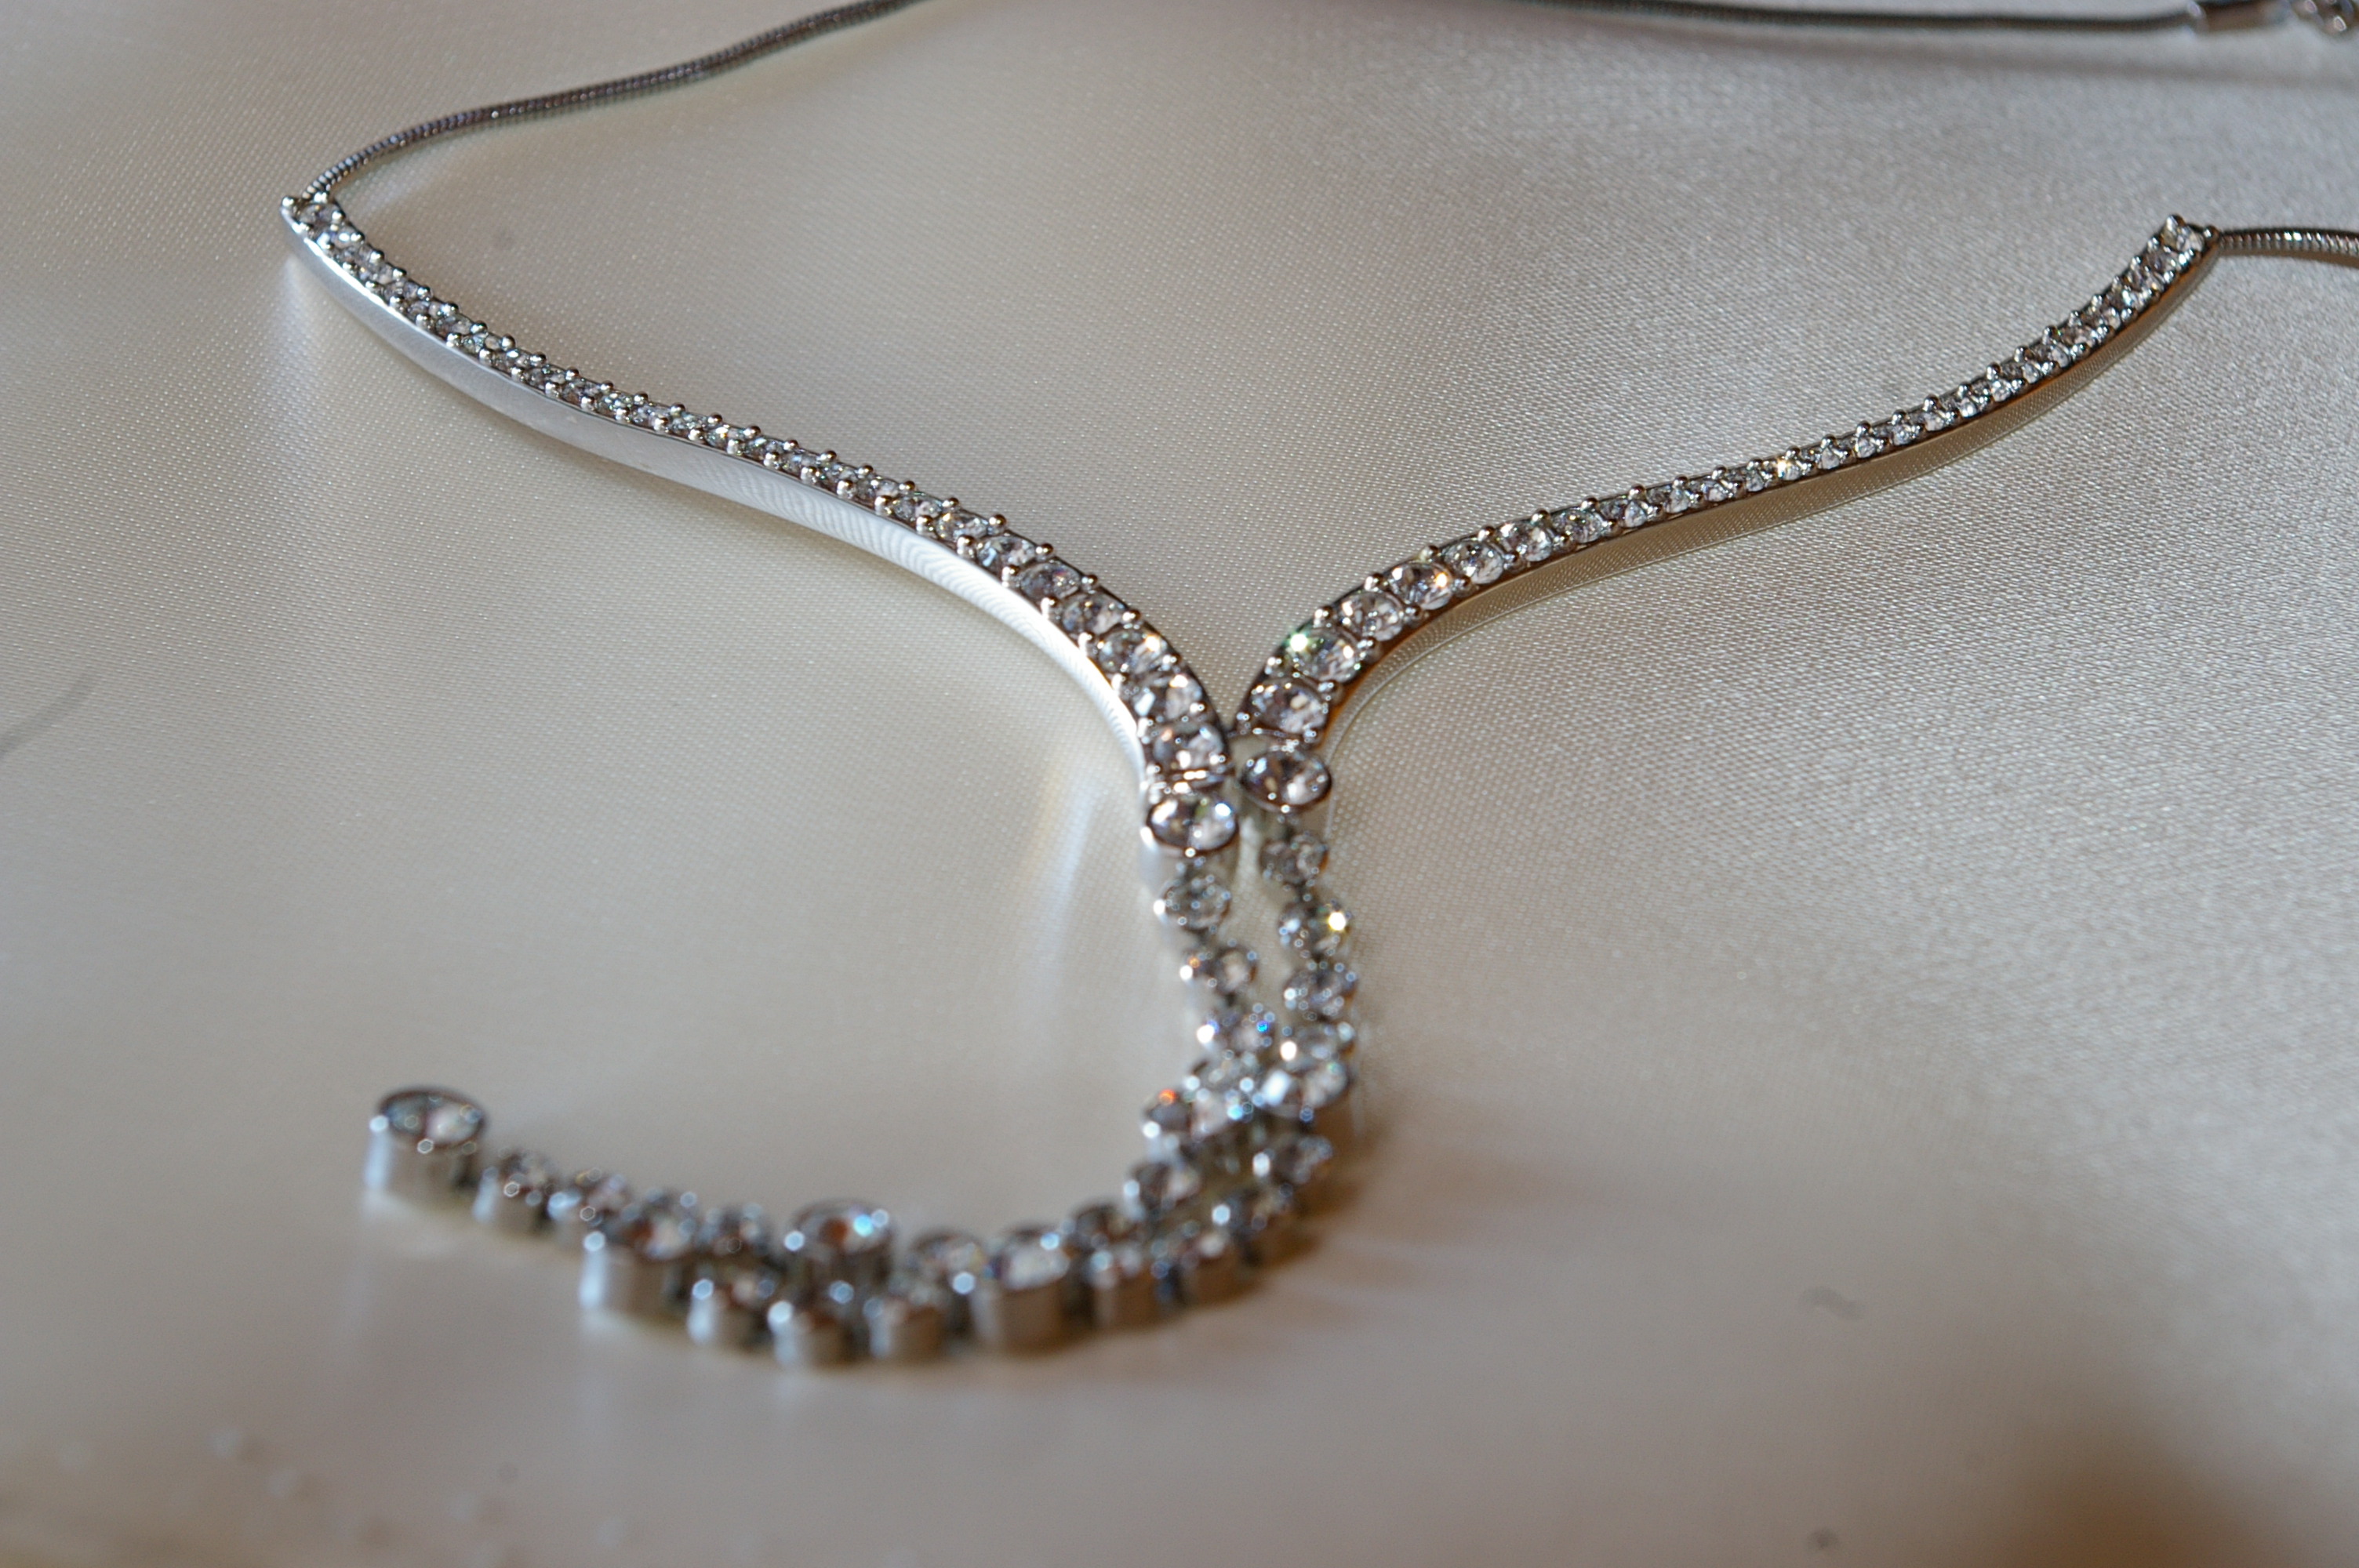 Crystal necklace photo